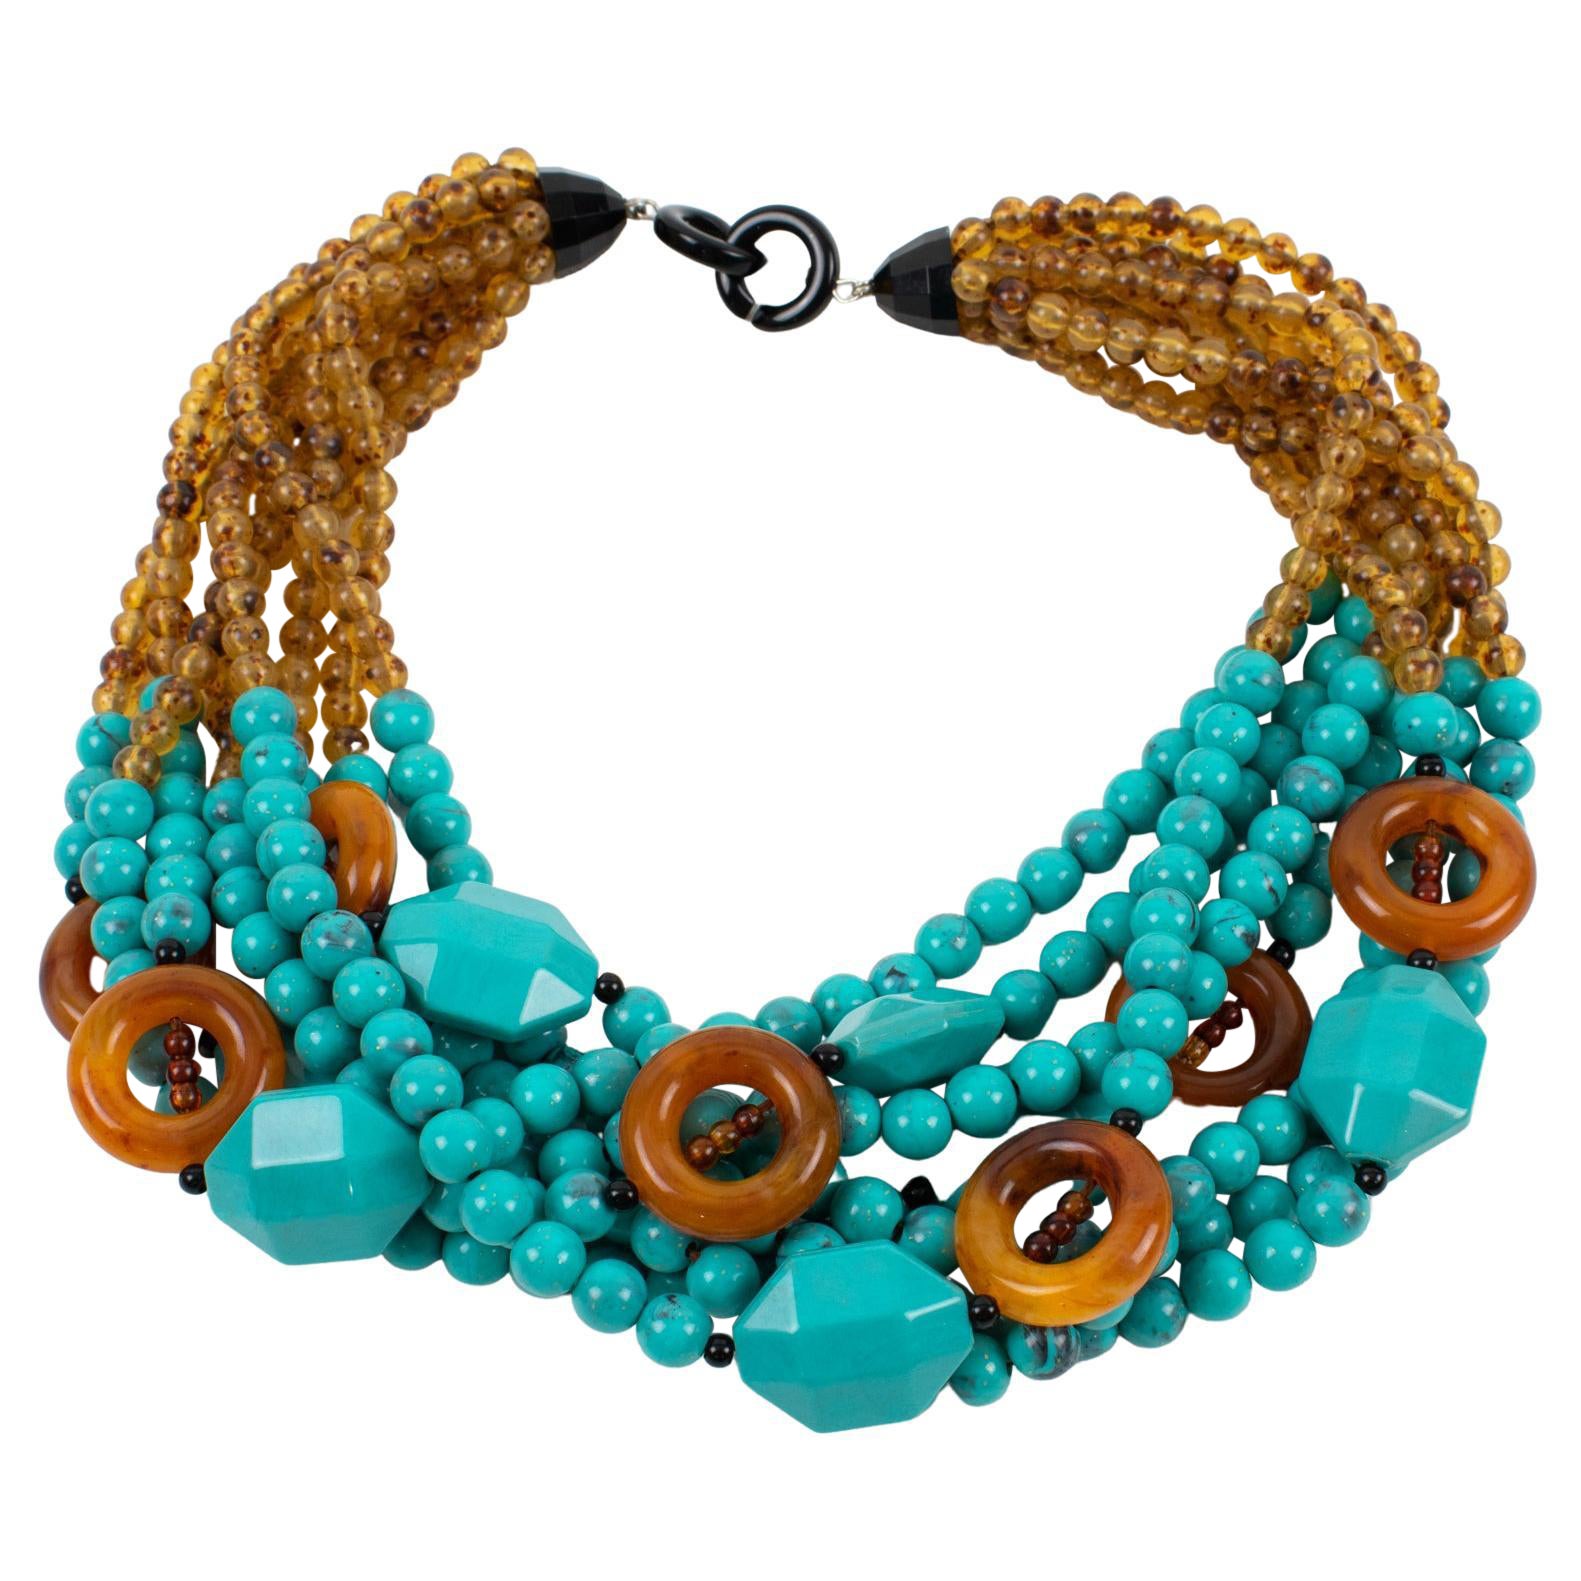 Angela Caputi Resin Choker Necklace Turquoise and Brown Multi-Strand